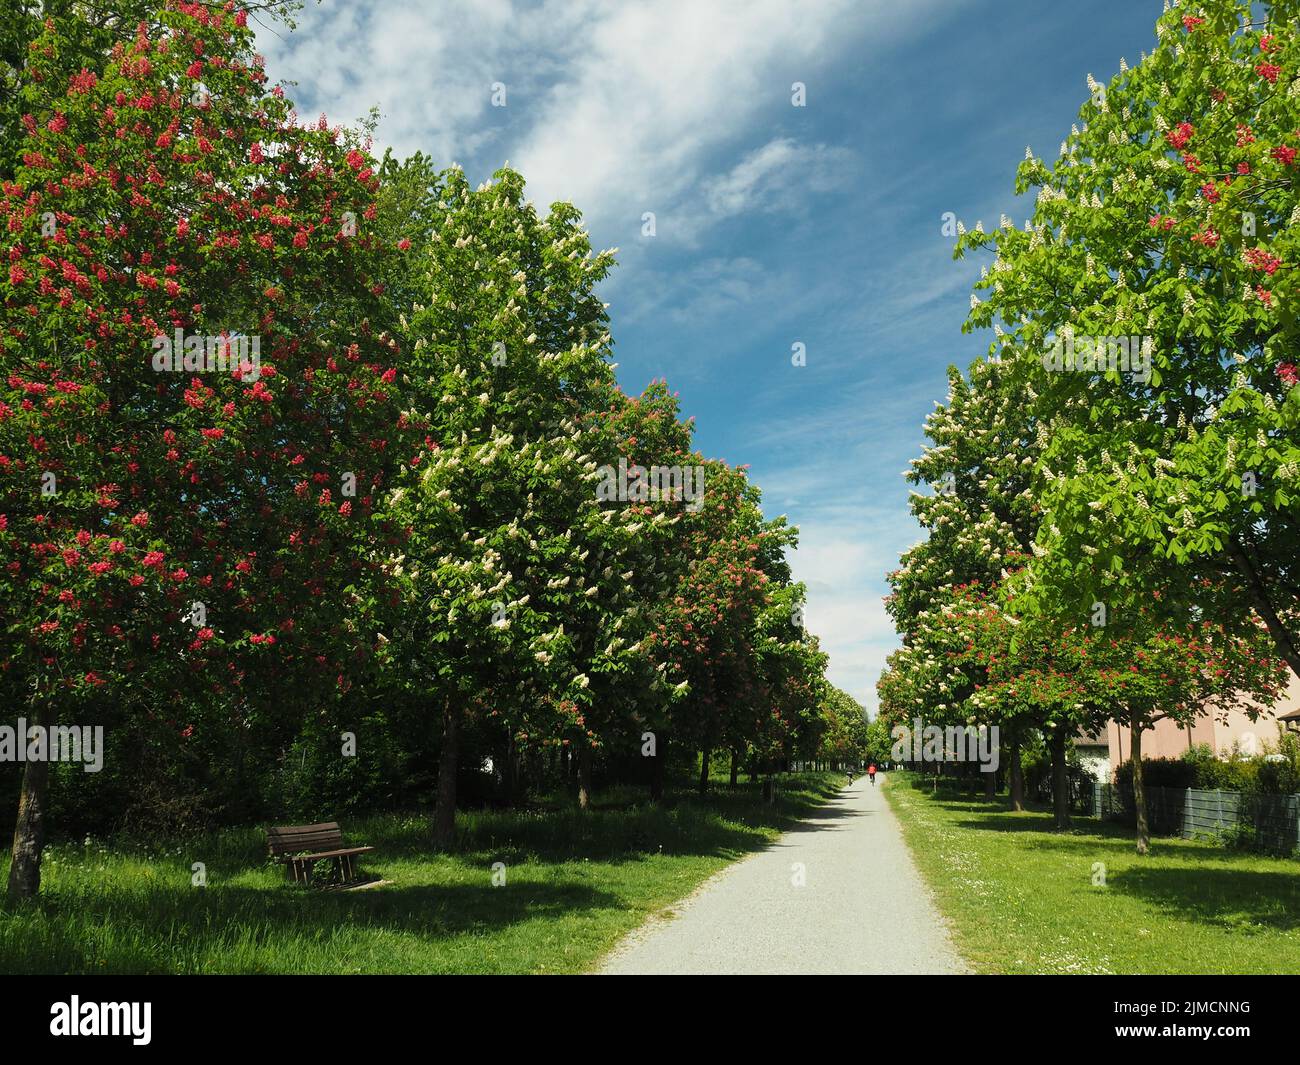 Chestnut alley with red and white flowering trees Stock Photo